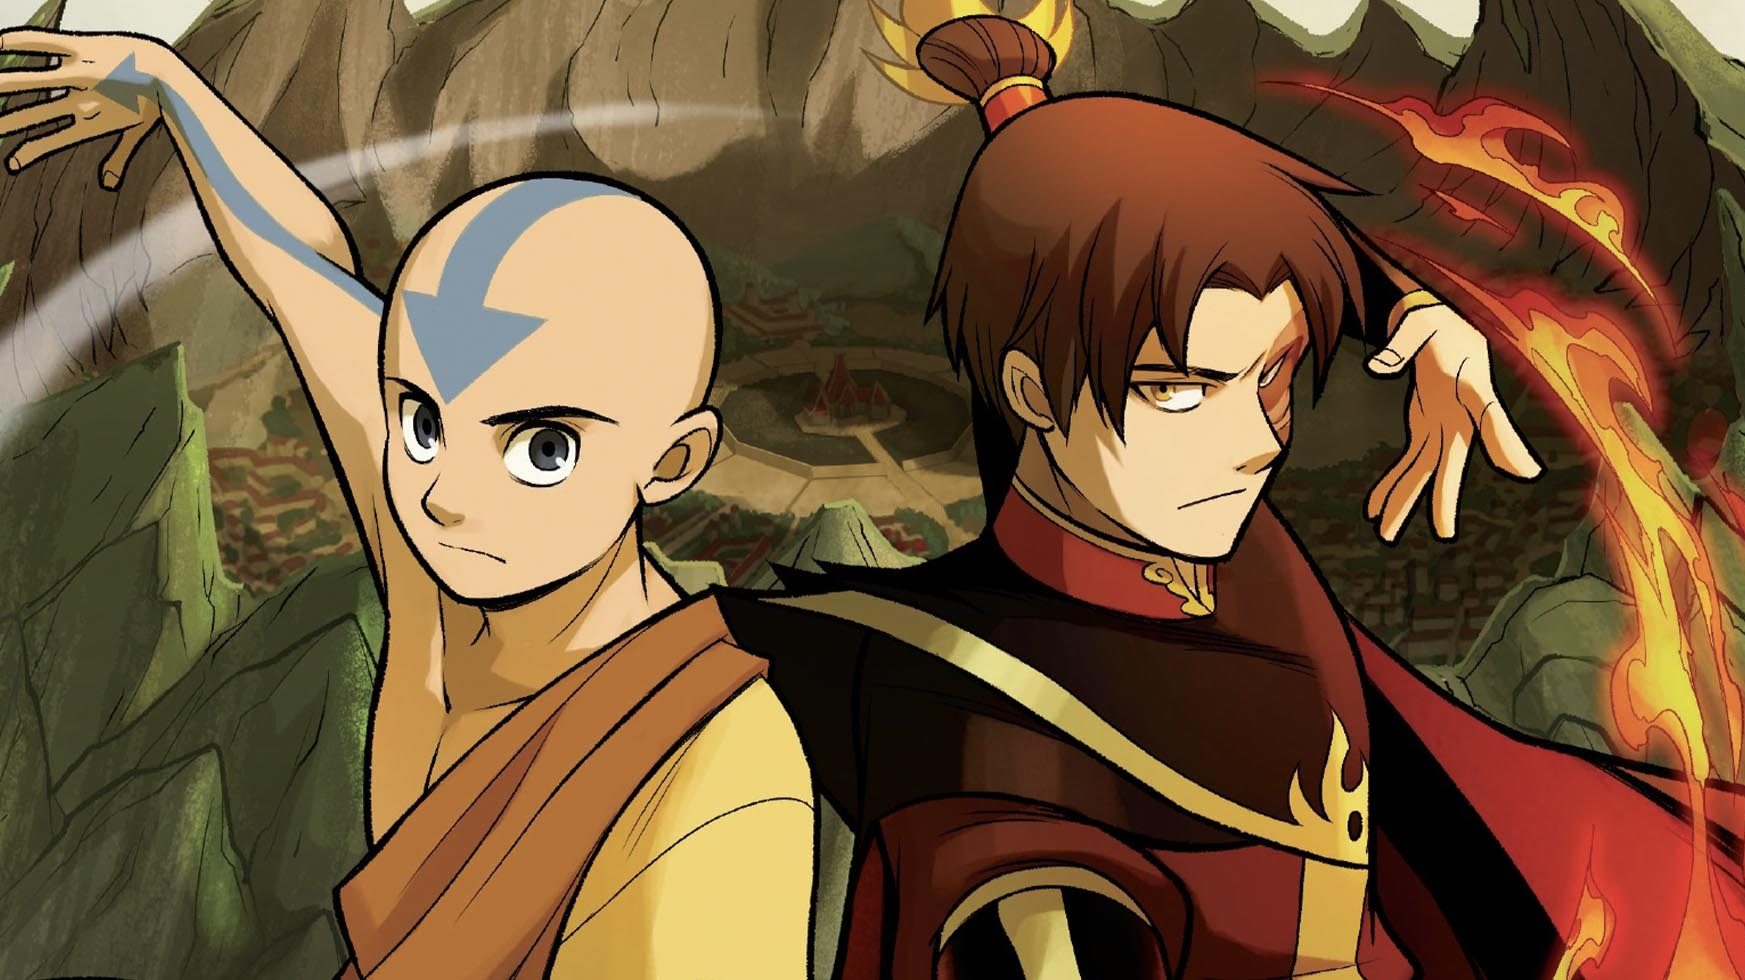 Unaired Avatar The Last Airbender Pilot Episode Released By Nickelodeon   Geek Culture